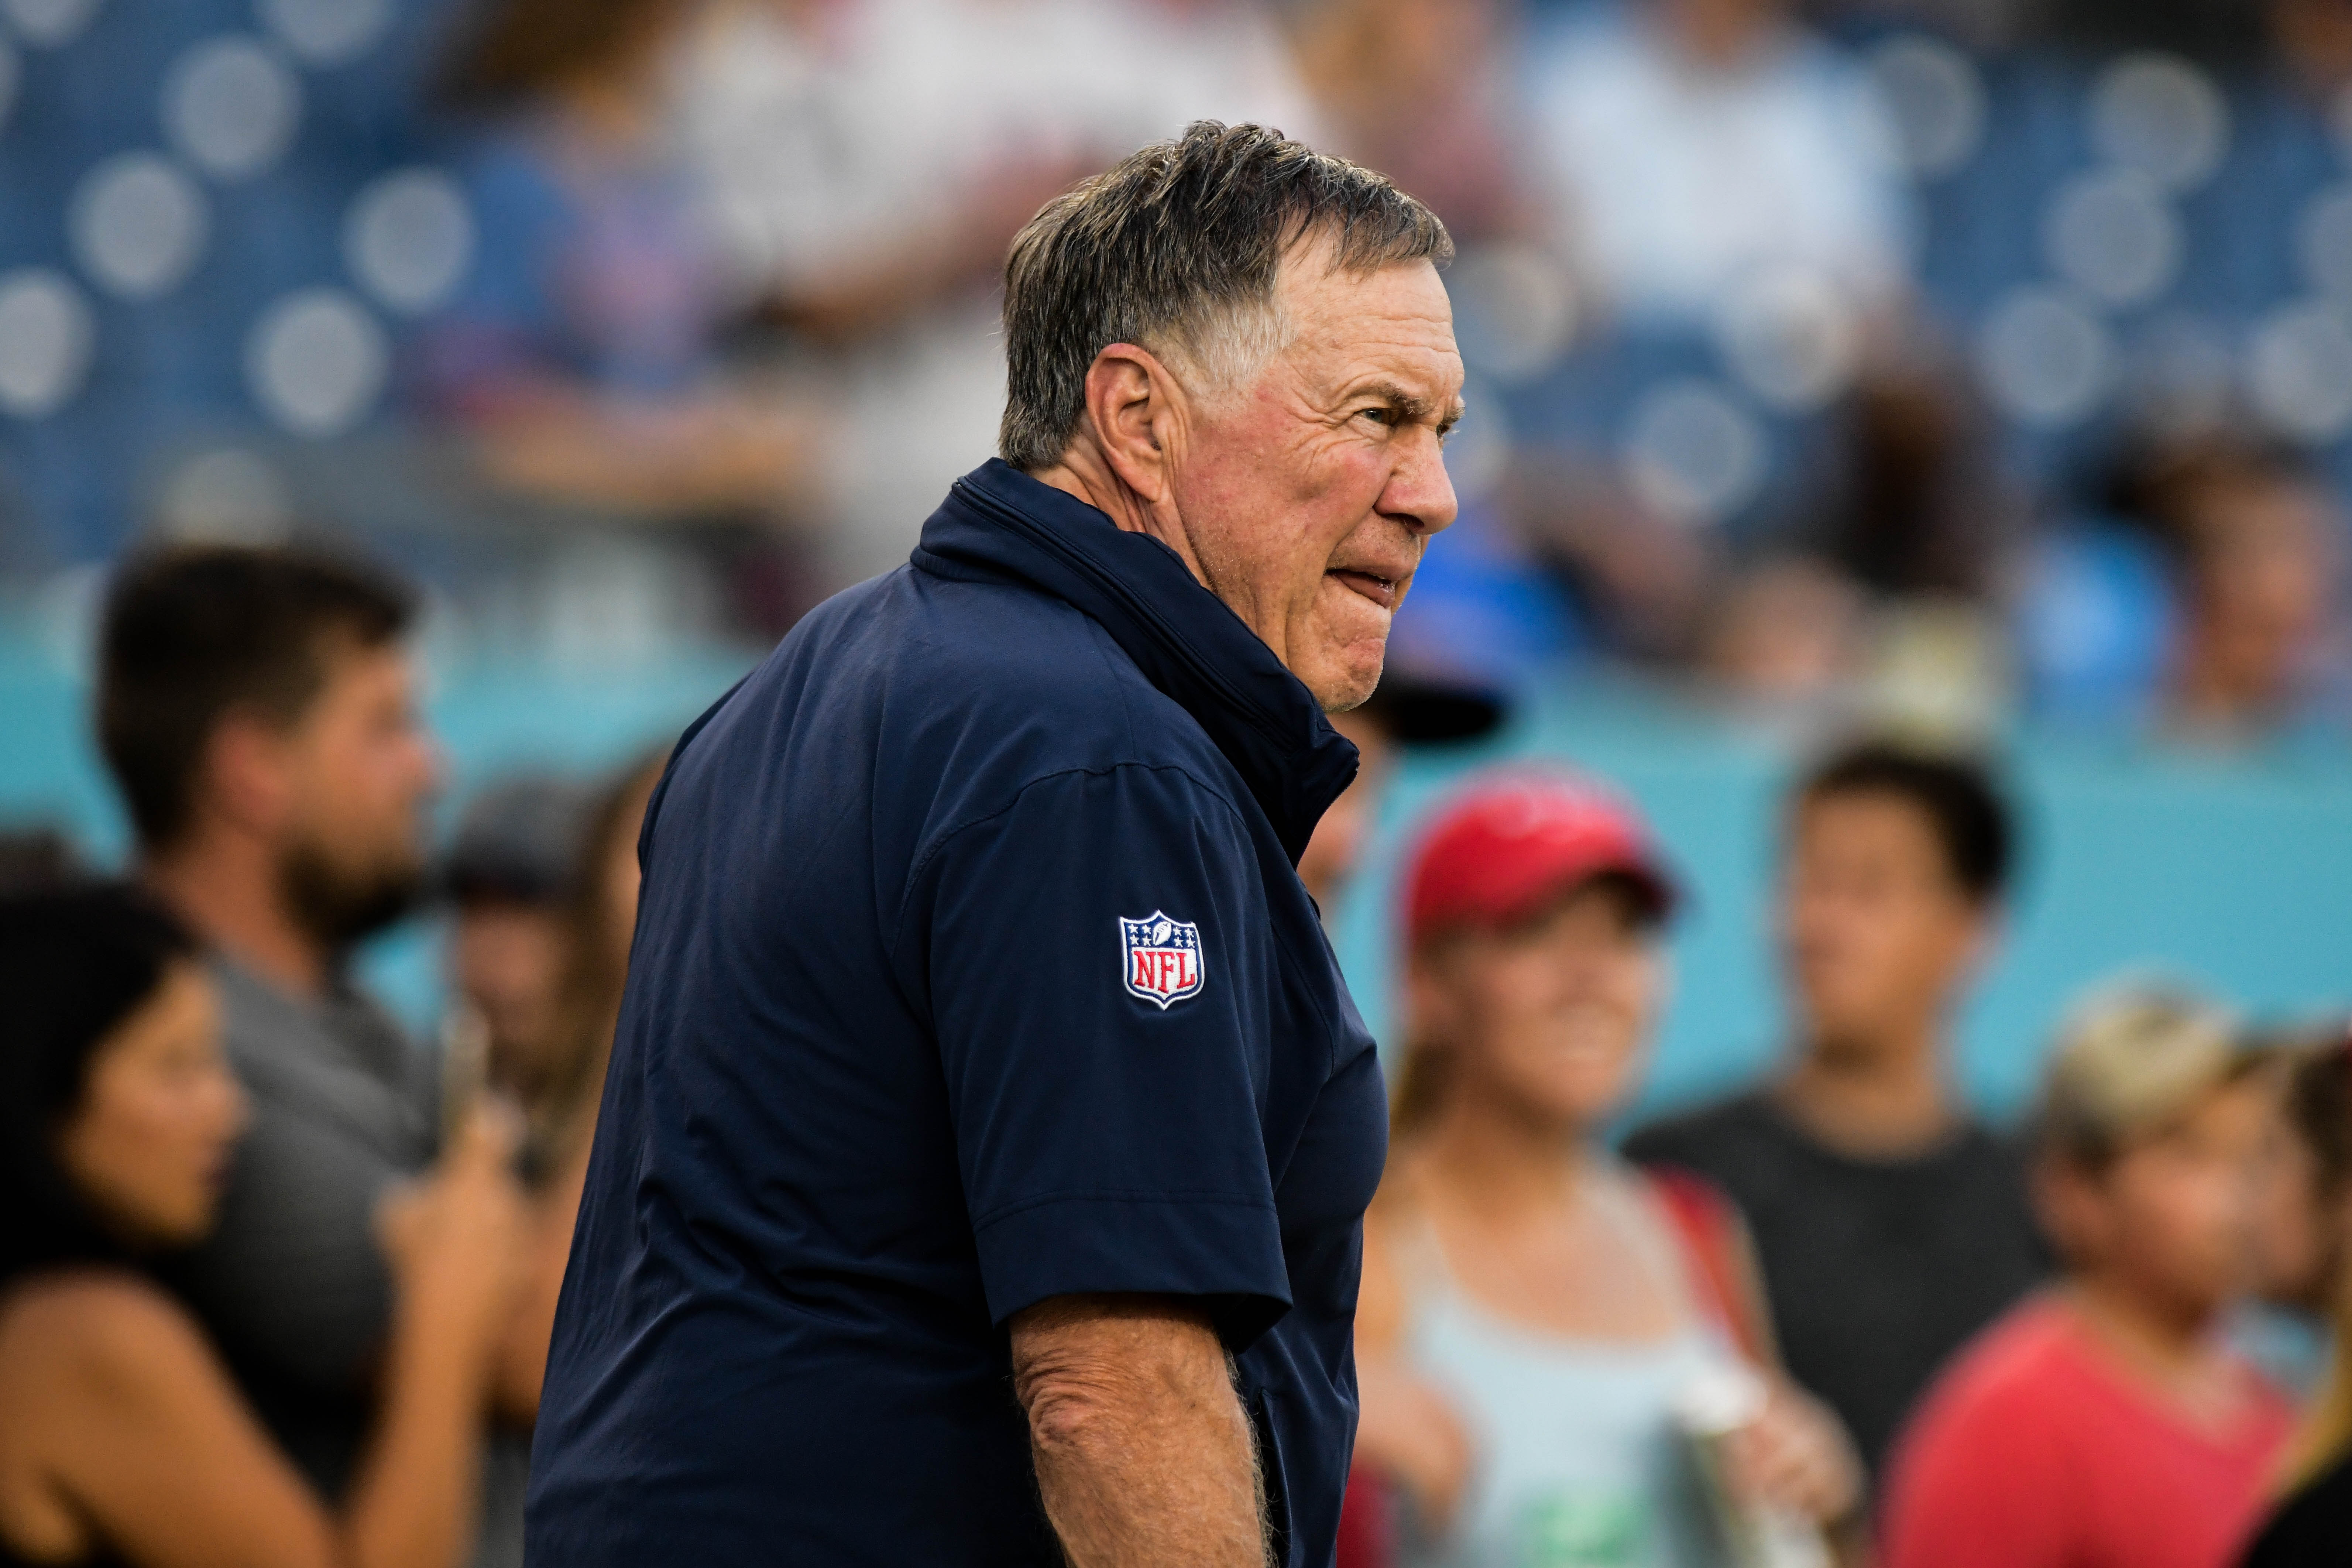 Bill Belichick of the New England Patriots walks on the sideline before the preseason game against the Tennessee Titans.